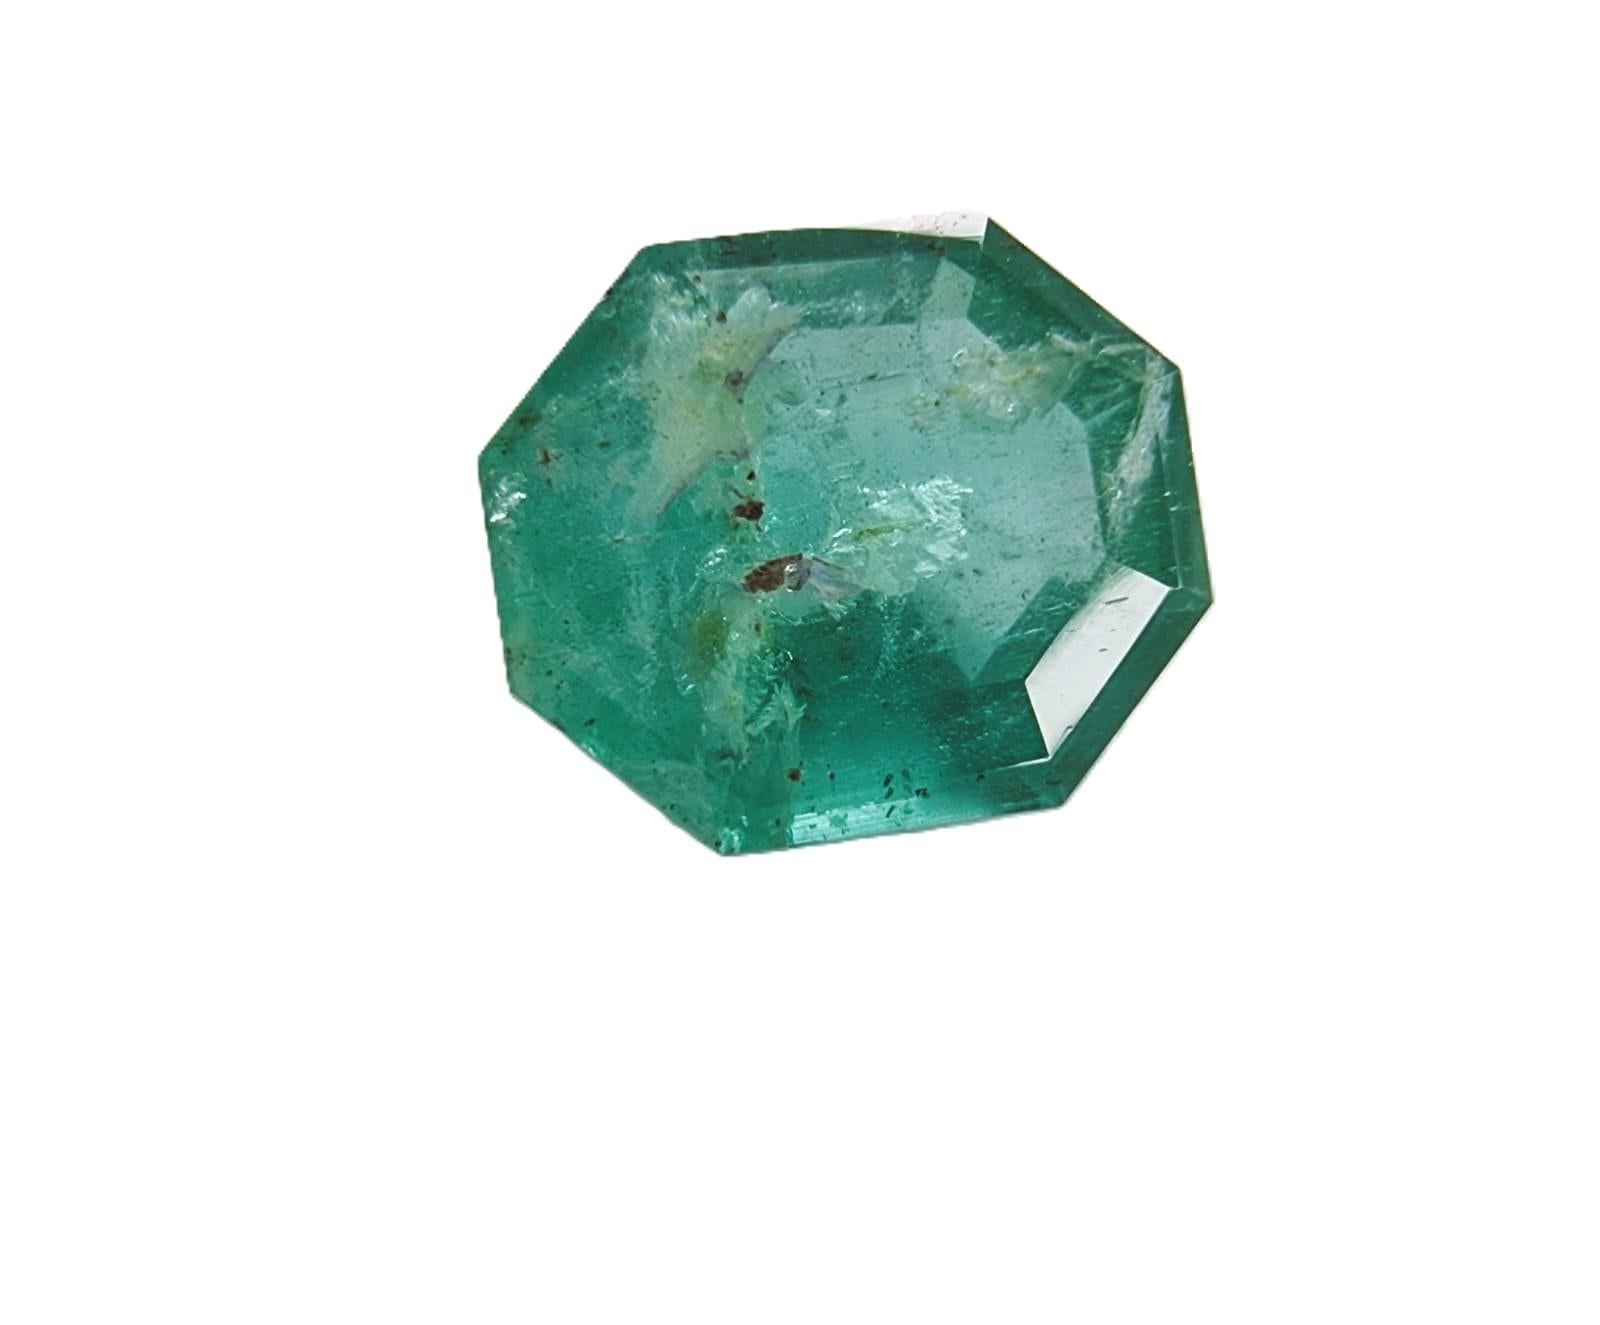 Artisan 2.02ct Octagonal Cut No-Oil Natural Untreated Emerald Gemstone For Sale